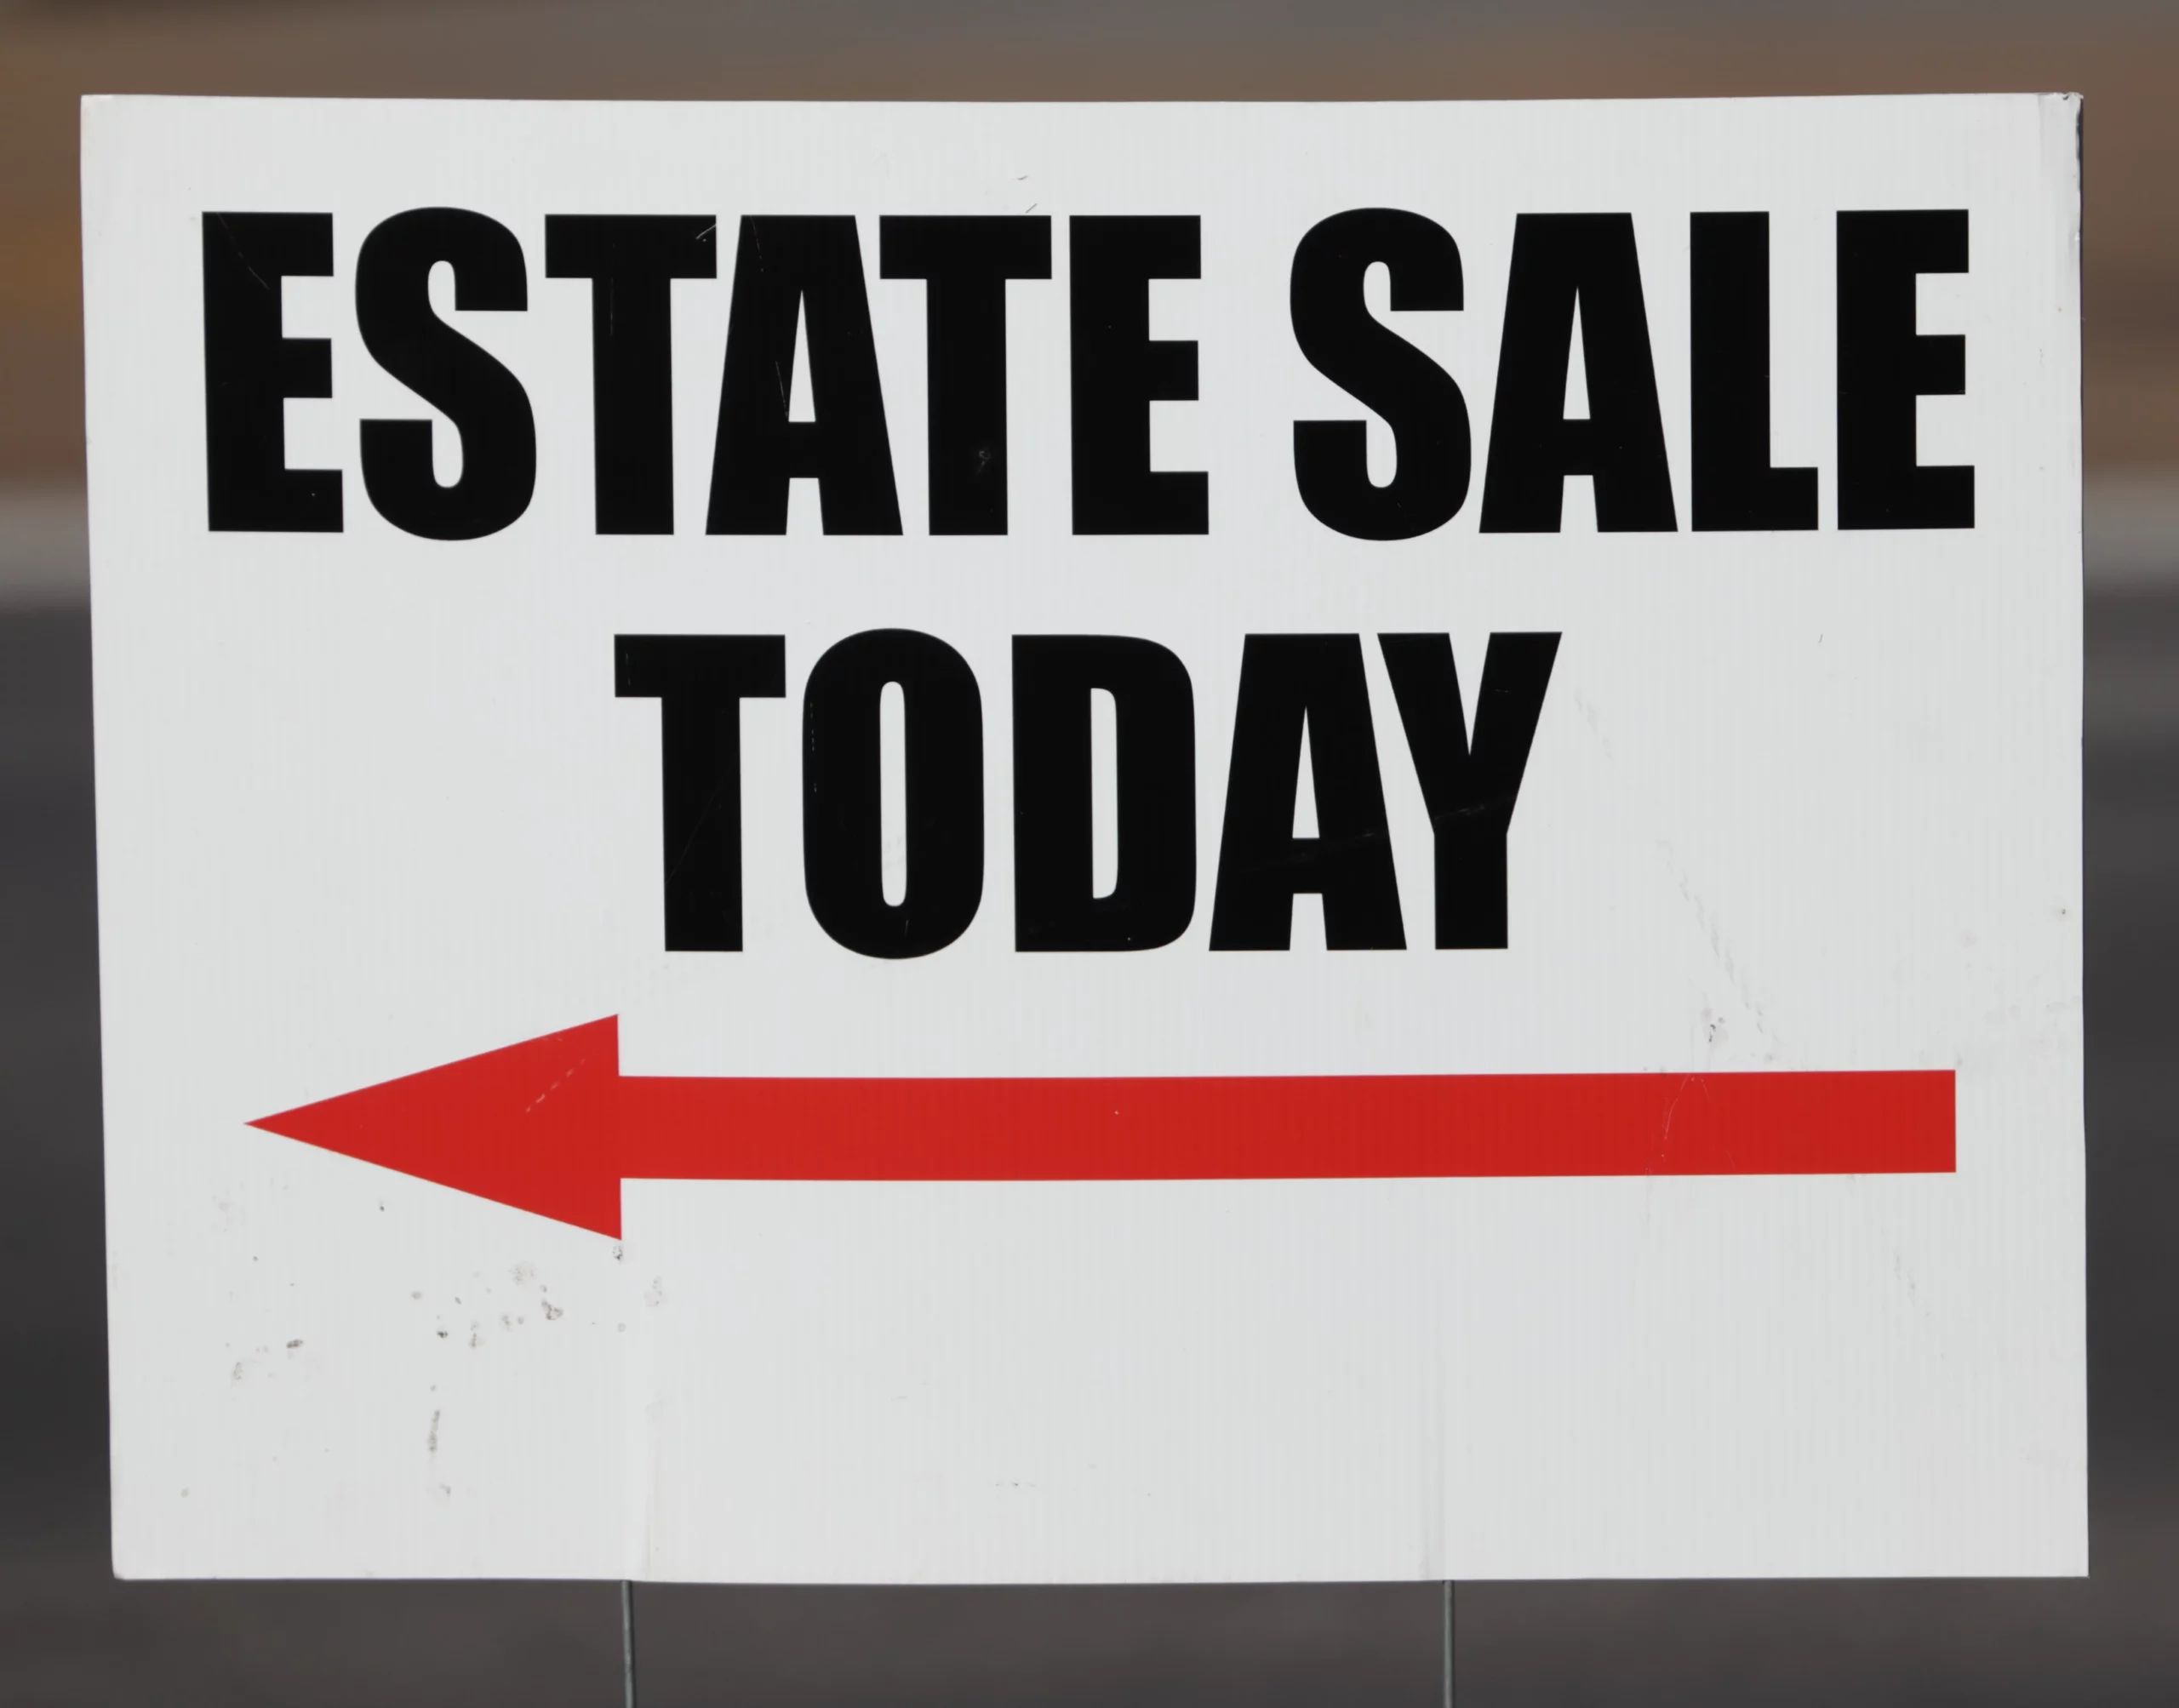 Do You Need a Permit for an Estate Sale? Understanding Local Regulations